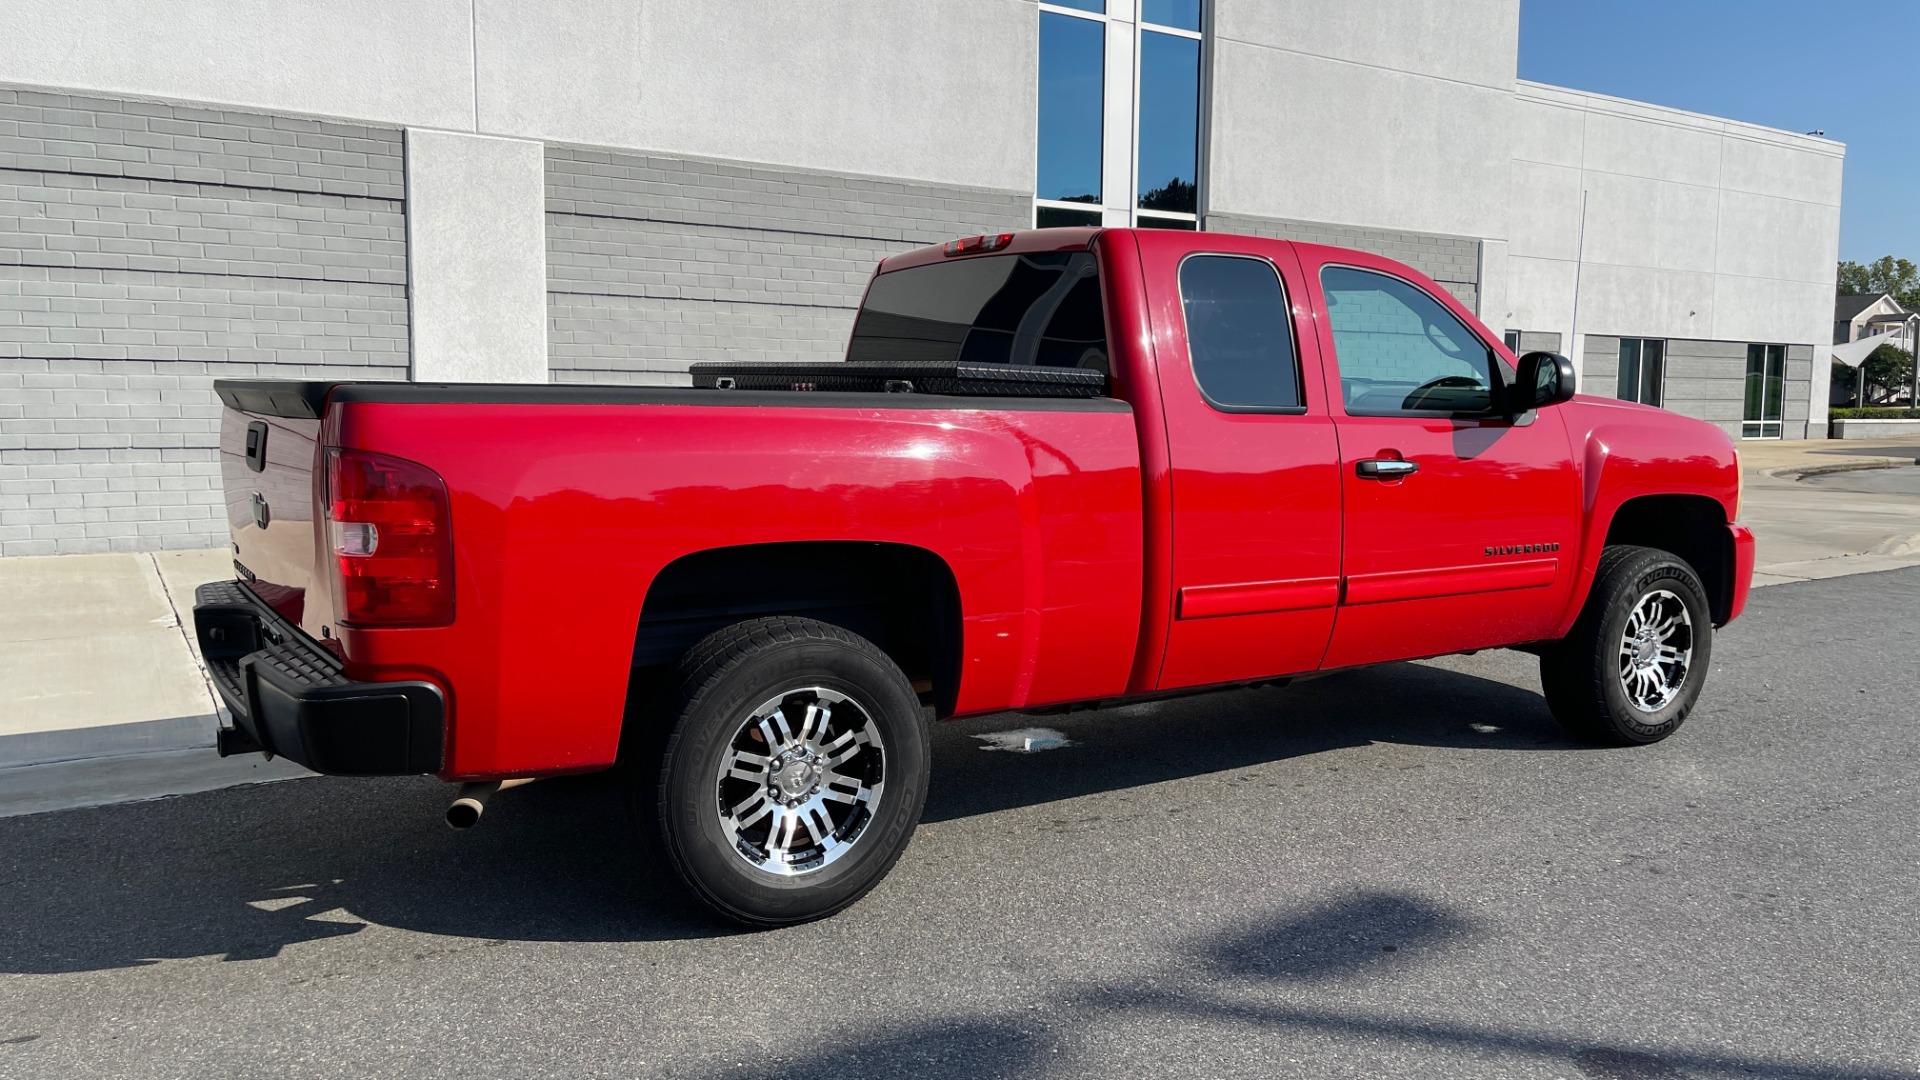 Used 2010 Chevrolet SILVERADO 1500 LT EXT CAB / 2WD / 5.3L V8 / AUTO / POWER PACK PLUS / TOWING for sale Sold at Formula Imports in Charlotte NC 28227 5